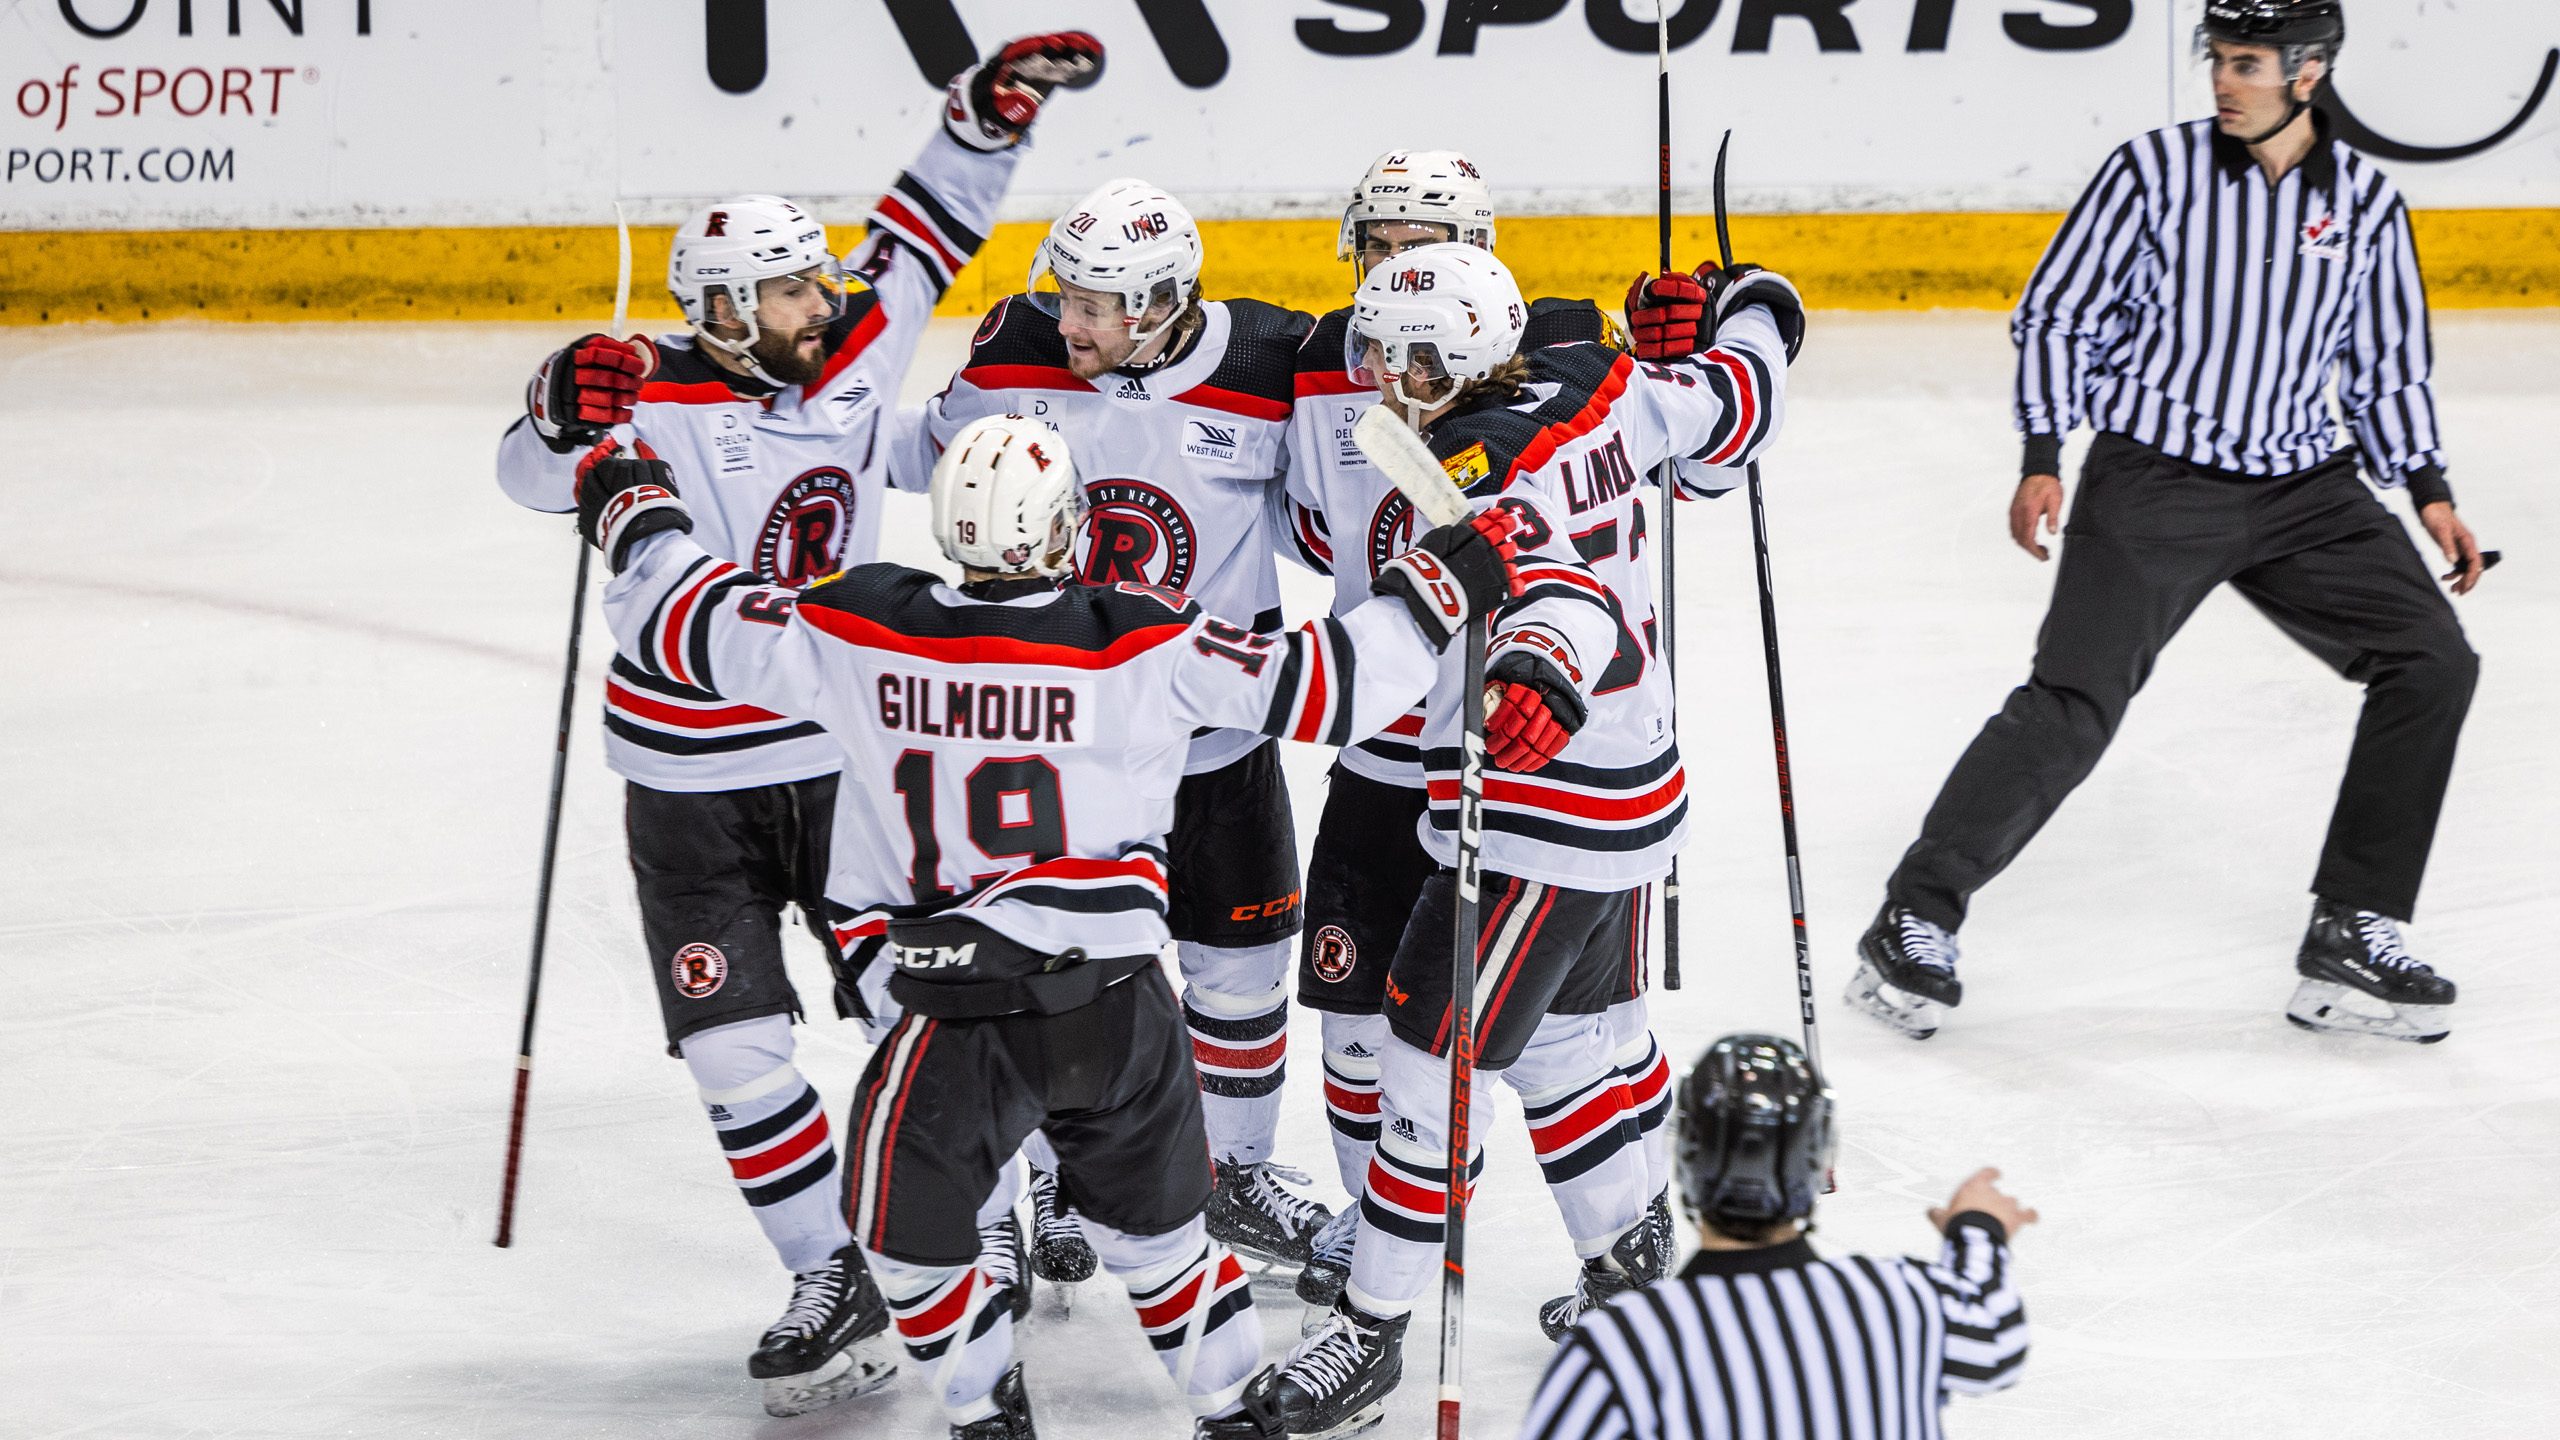 UNB players celebrate by hugging each other in a huddle